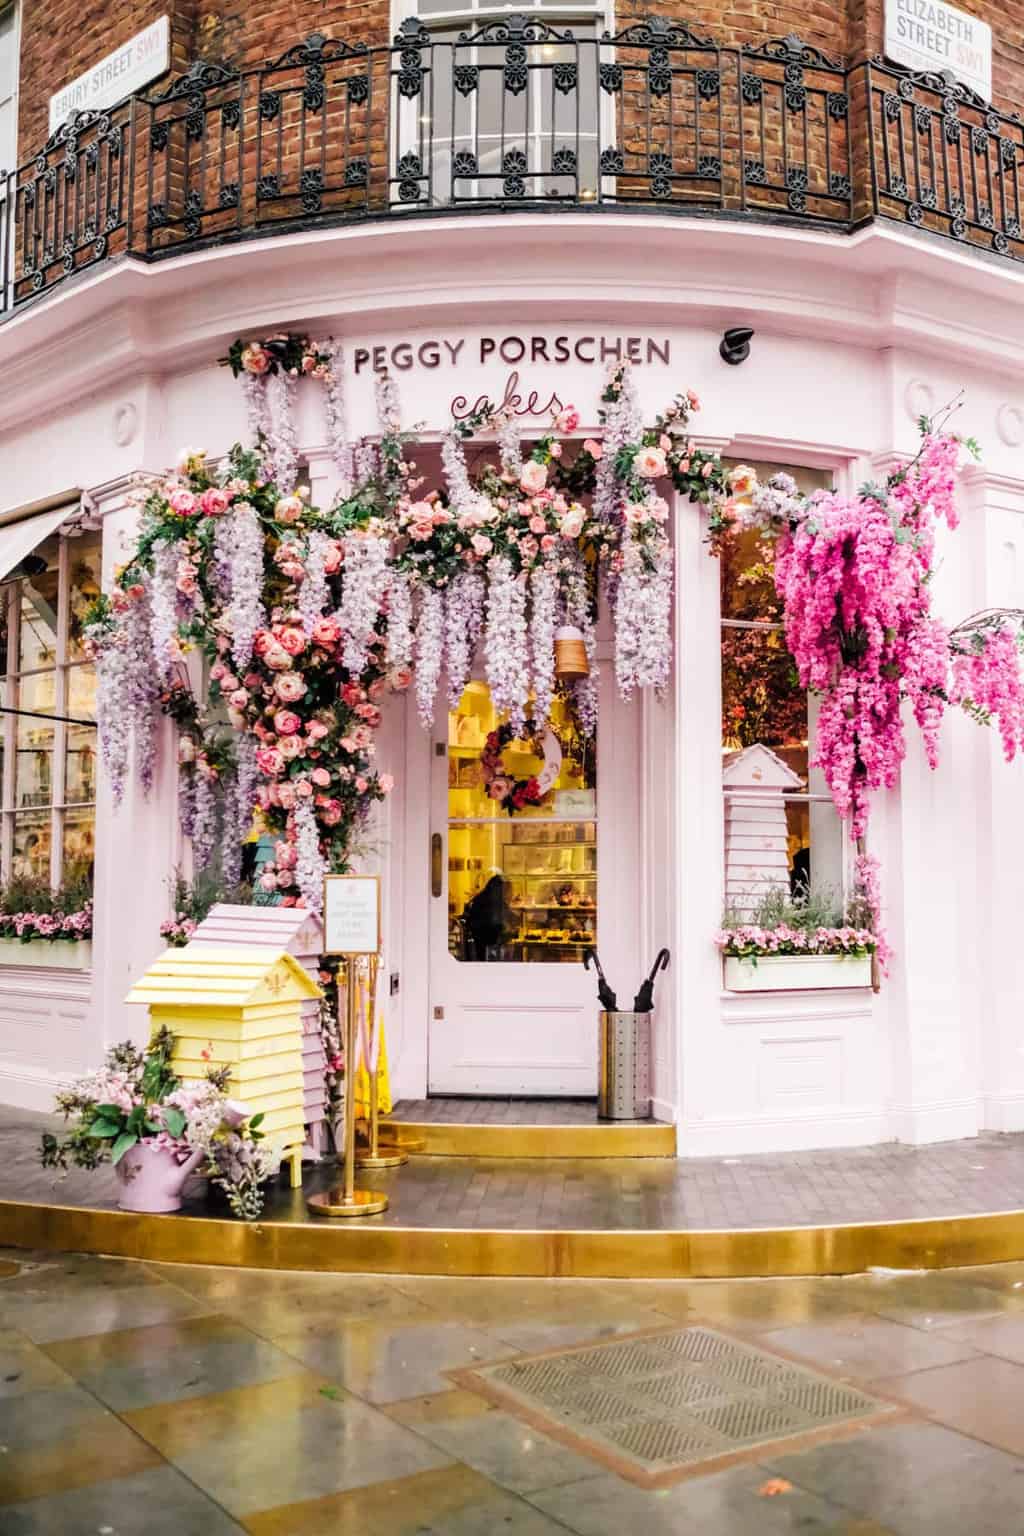 Dying over the Peggy Porschen entrance in London! Photos of Our British Isles Cruise with Family! | Part 1 # travel #familytravel #cruise #decor #design #britishisles